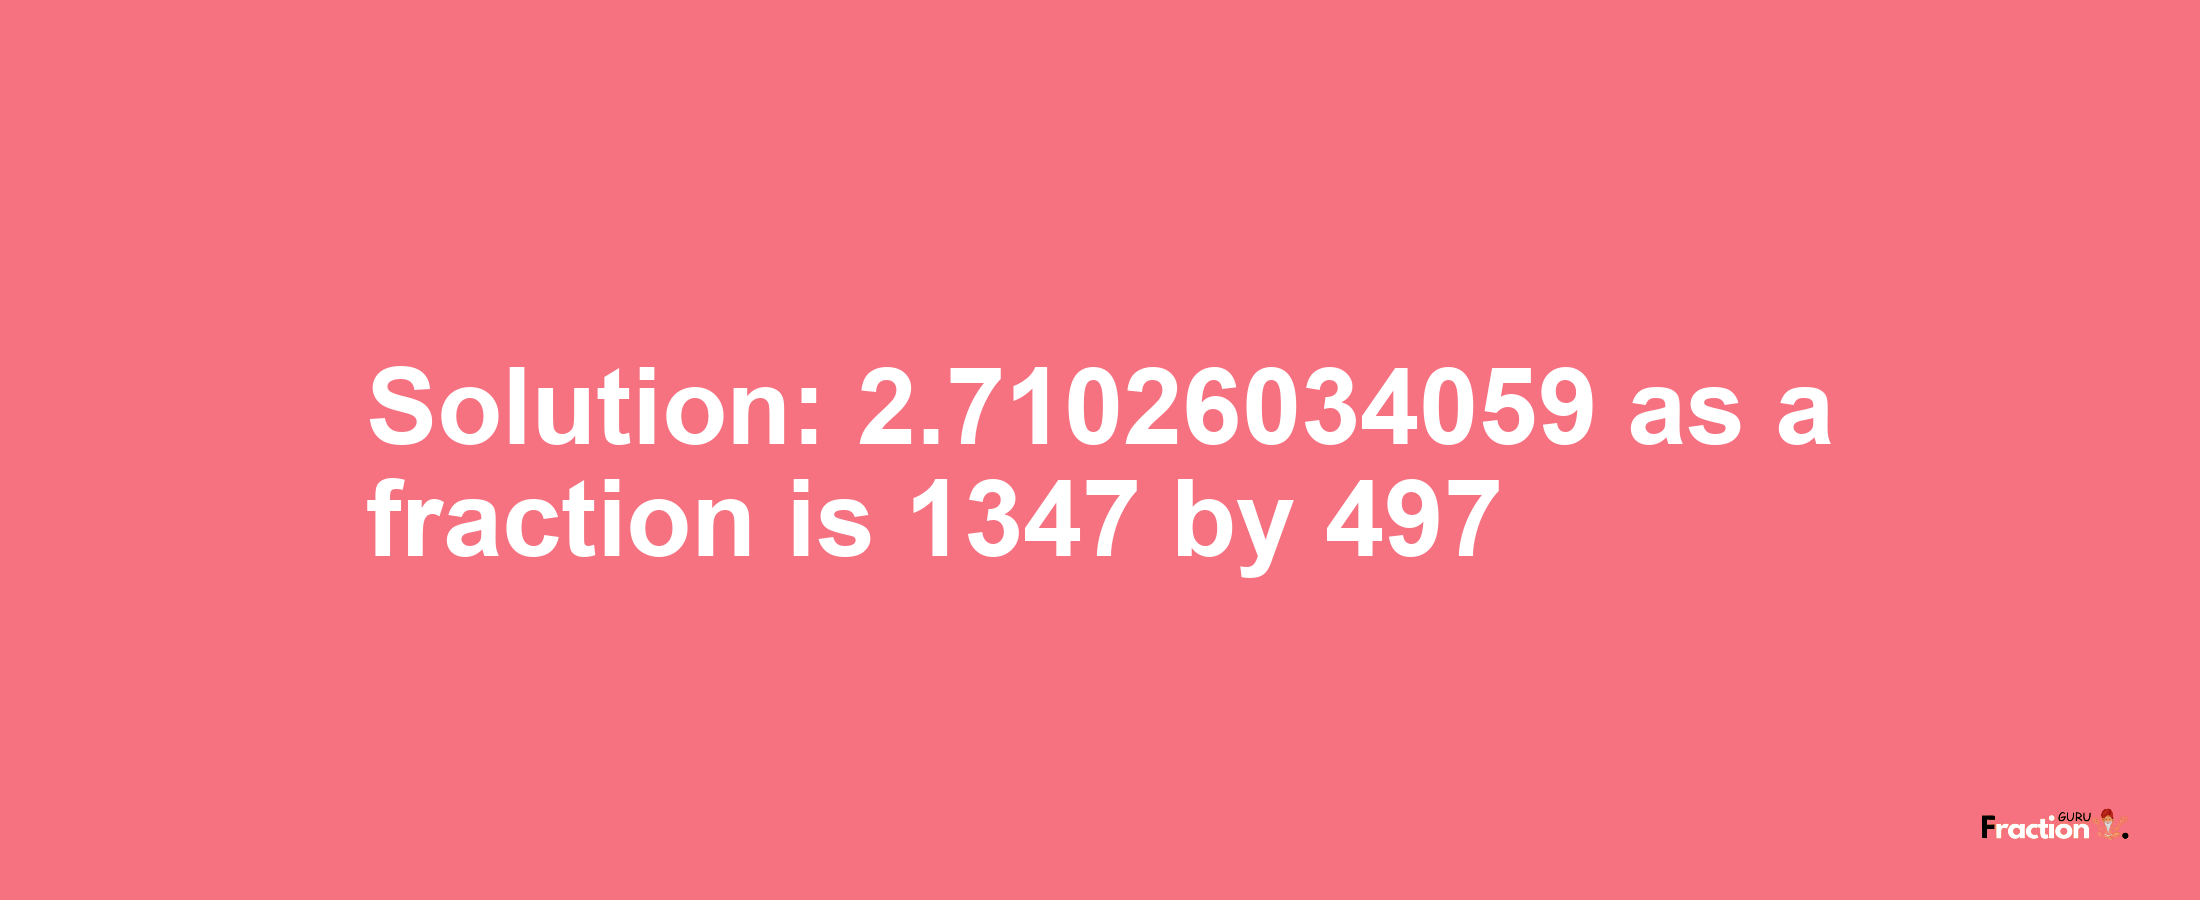 Solution:2.71026034059 as a fraction is 1347/497